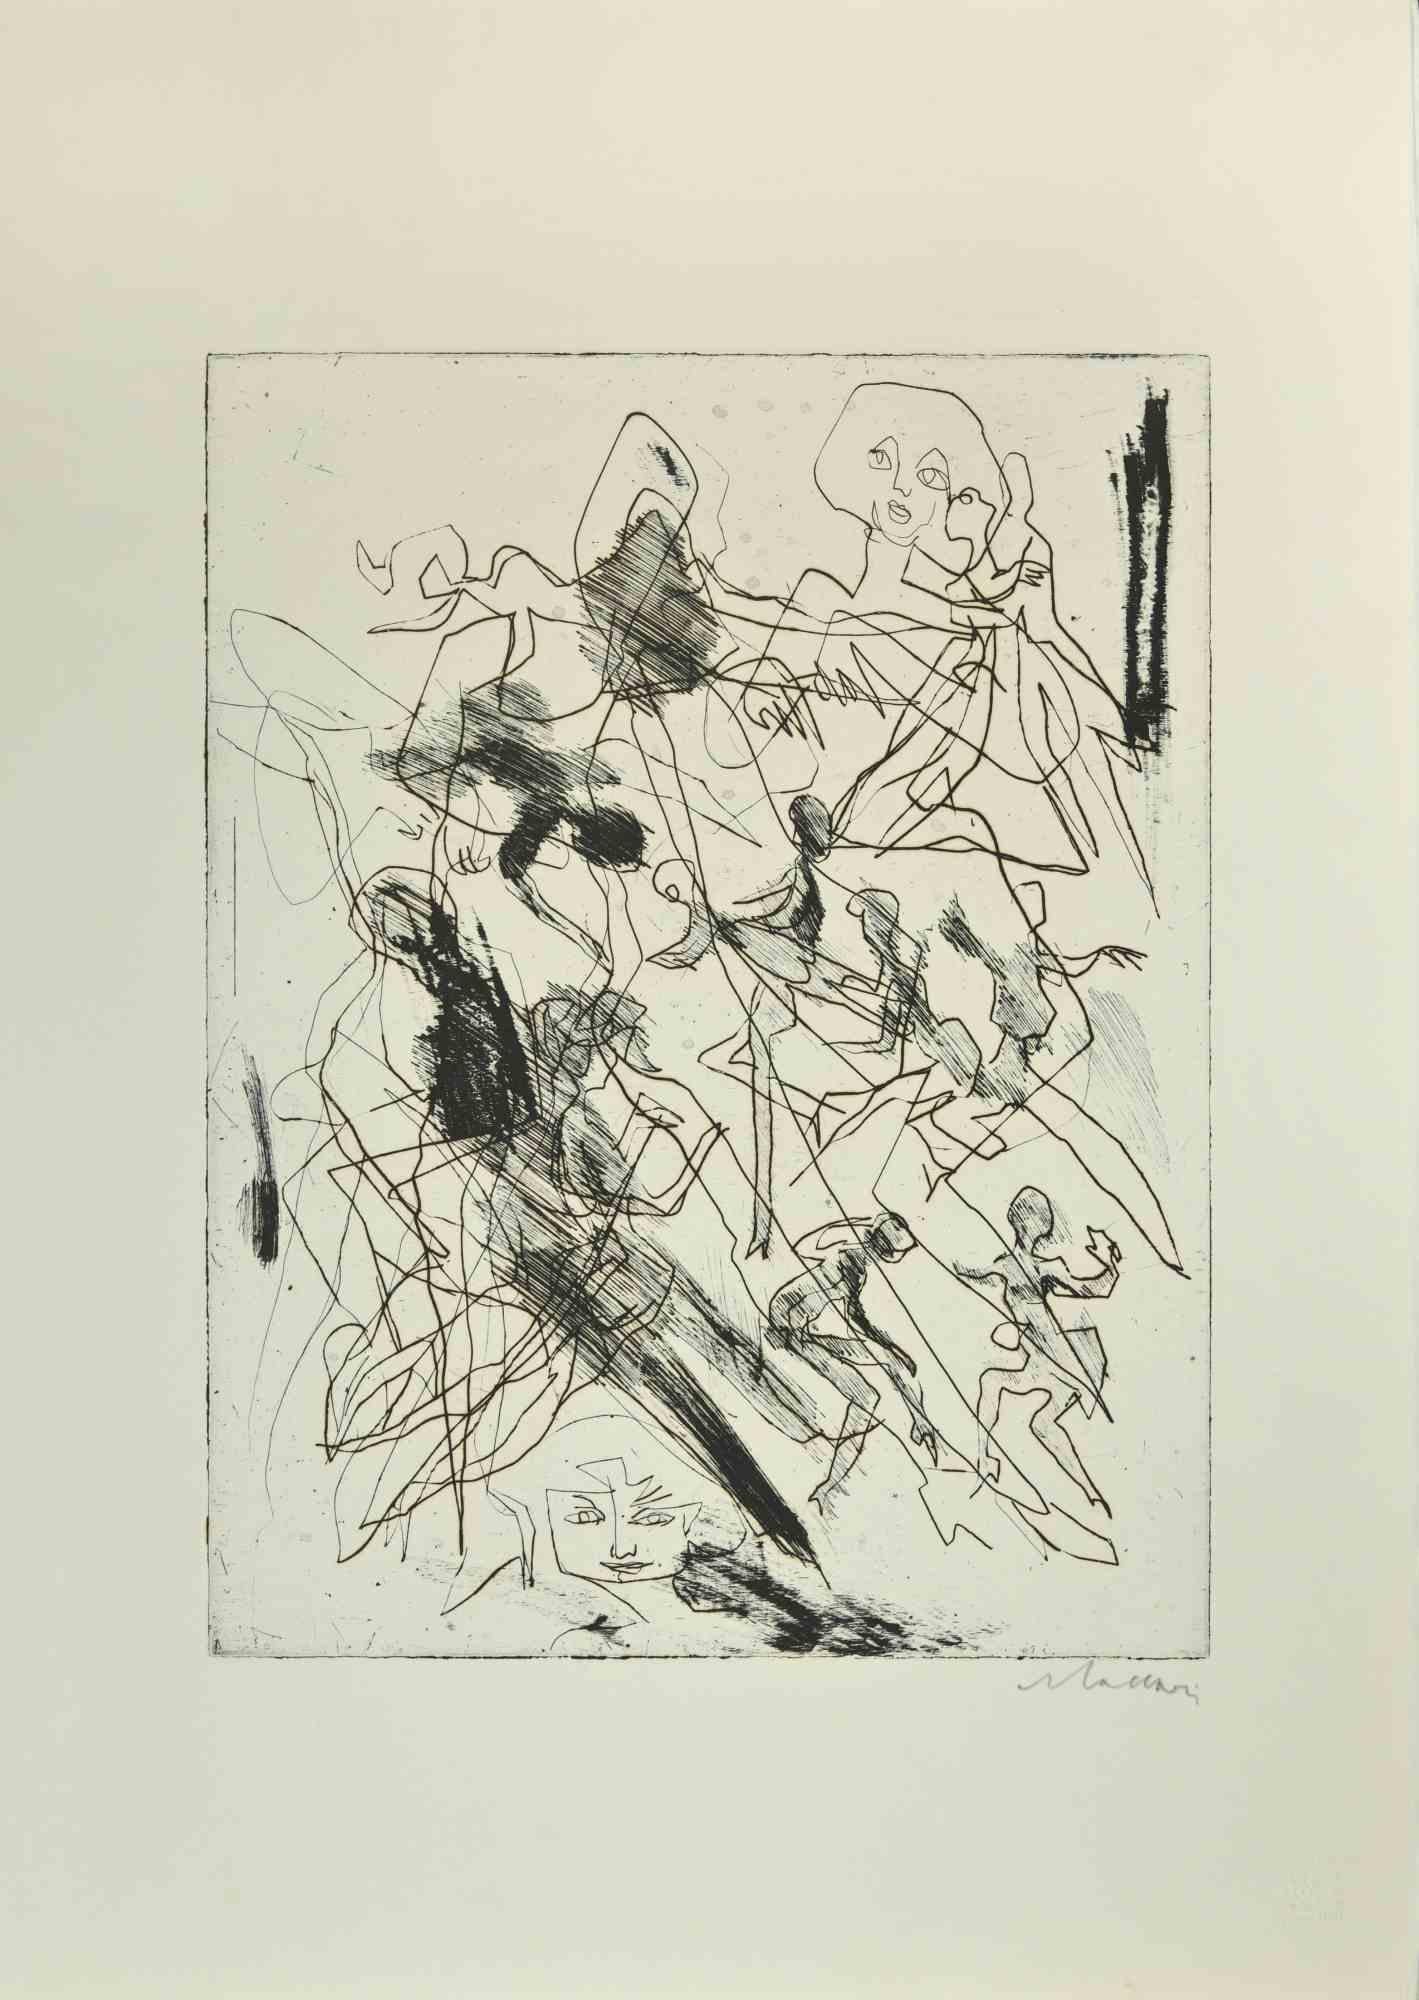 Figures is an Etching realized by Mino Maccari in the Mid-20th Century.

Hand-signed in the lower right part.

Good conditions.

 

Mino Maccari (Siena, 1924-Rome, June 16, 1989) was an Italian writer, painter, engraver and journalist, winner of the